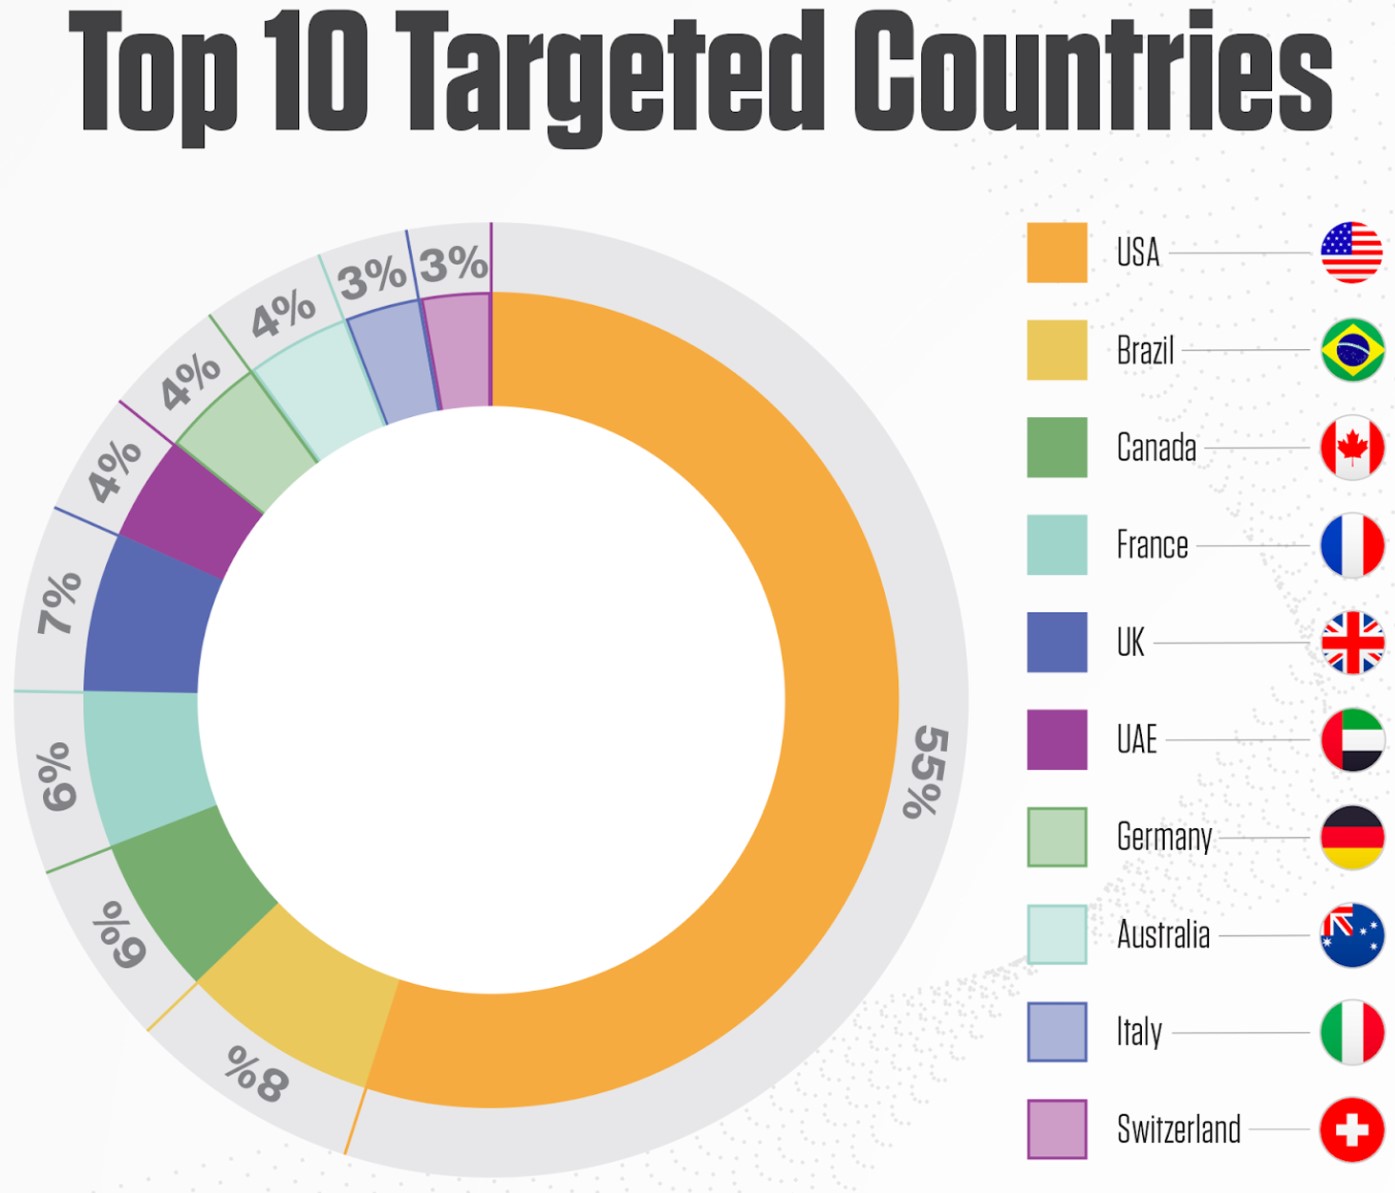 The most targeted countries by access brokers